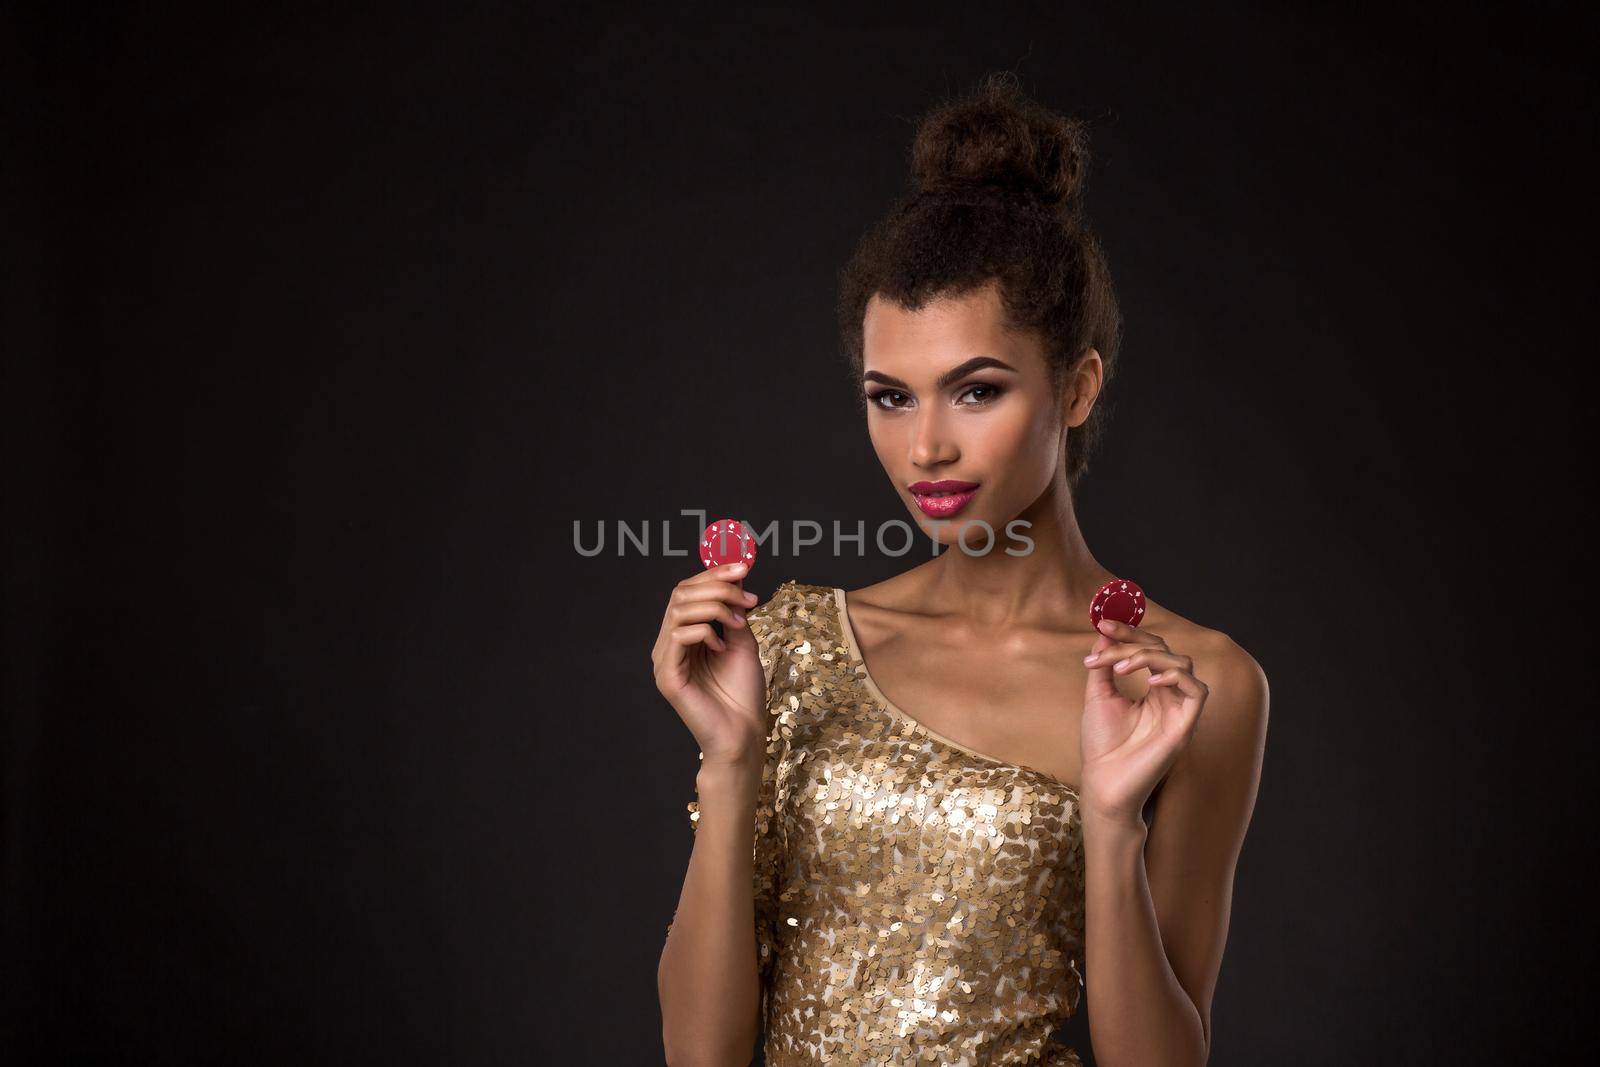 Woman winning - Young woman in a classy gold dress holding two red chips, a poker of aces card combination. Studio shot on black background